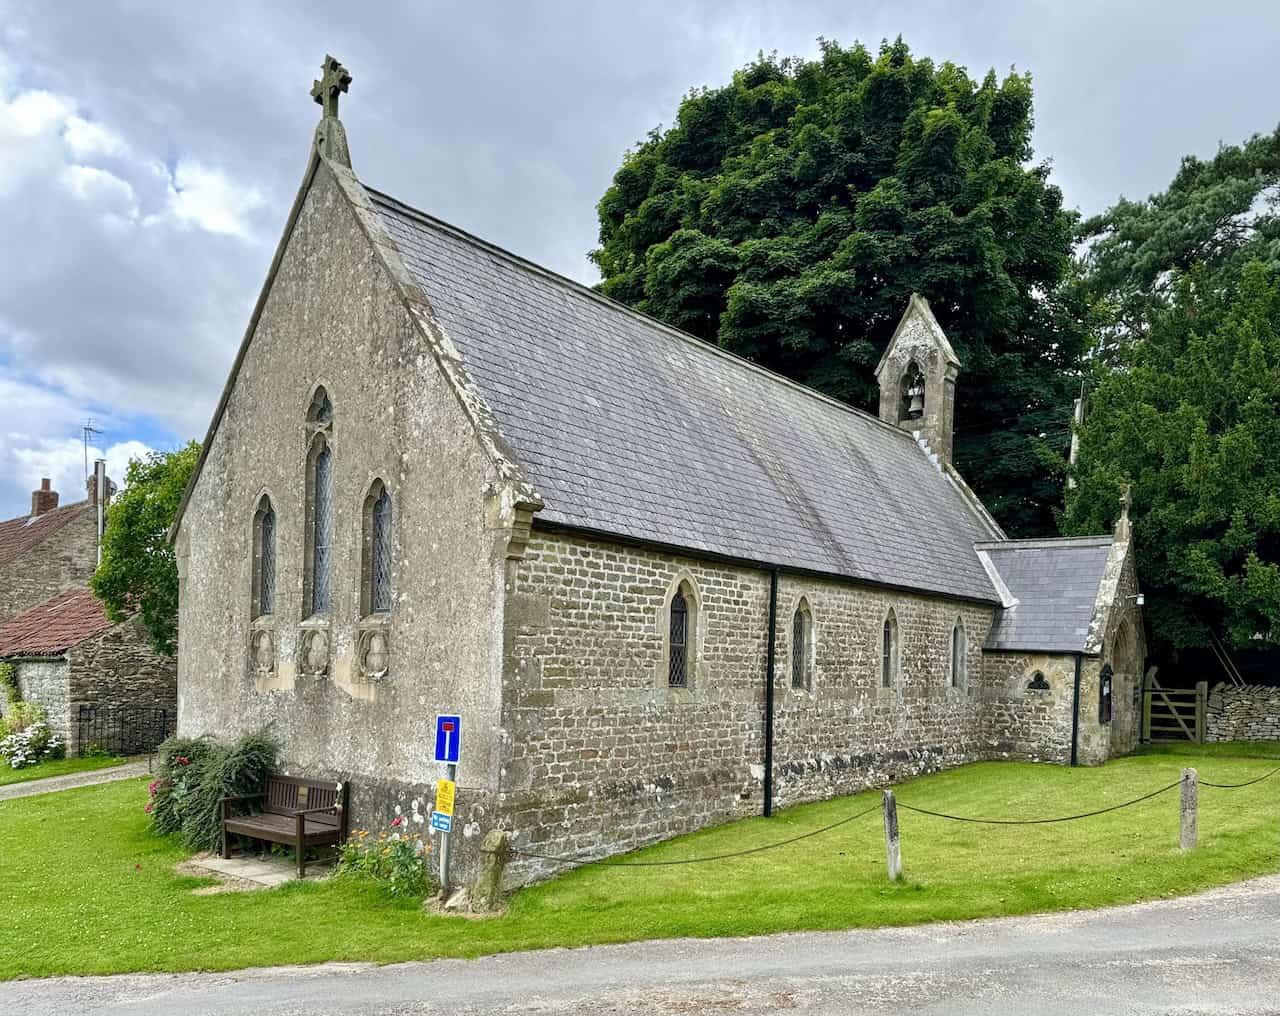 St John the Baptist Church in Levisham village, a nineteenth-century building replacing the Church of St Mary the Virgin, now a ruin.